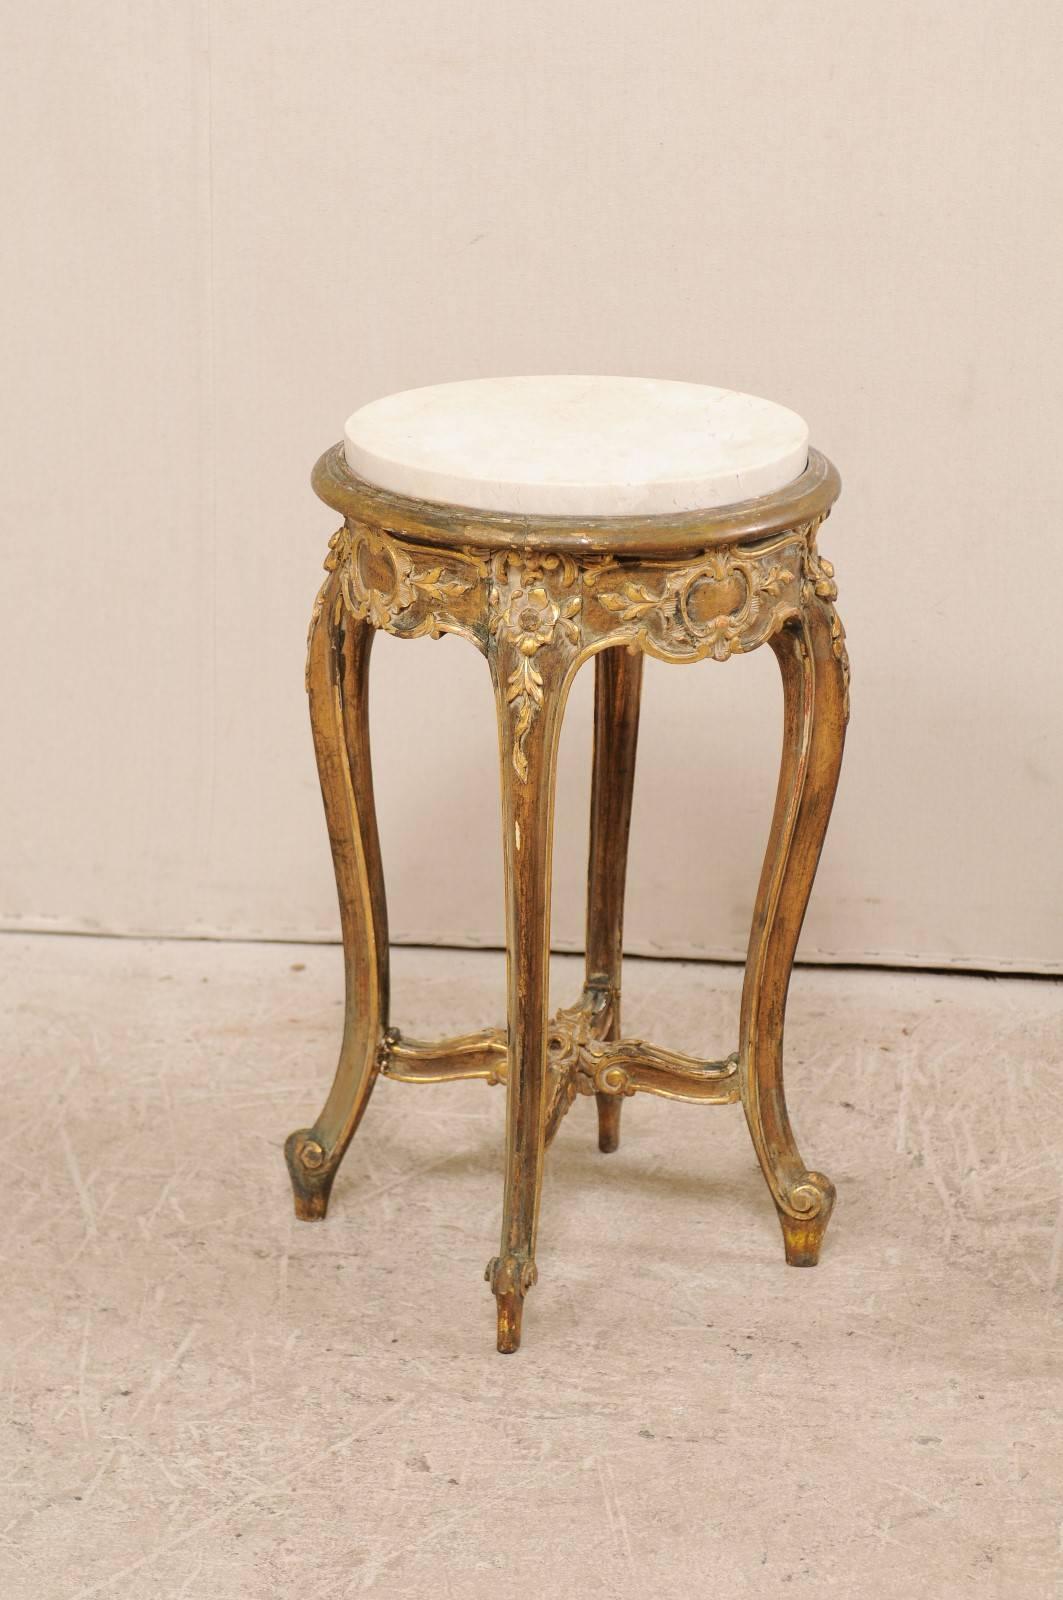 A pair of French midcentury round marble top occasional tables. These French tables from the mid-20th century each feature a round honed marble top, and beautifully carved wood base with gilt details throughout. The circular-shaped skirt is adorned